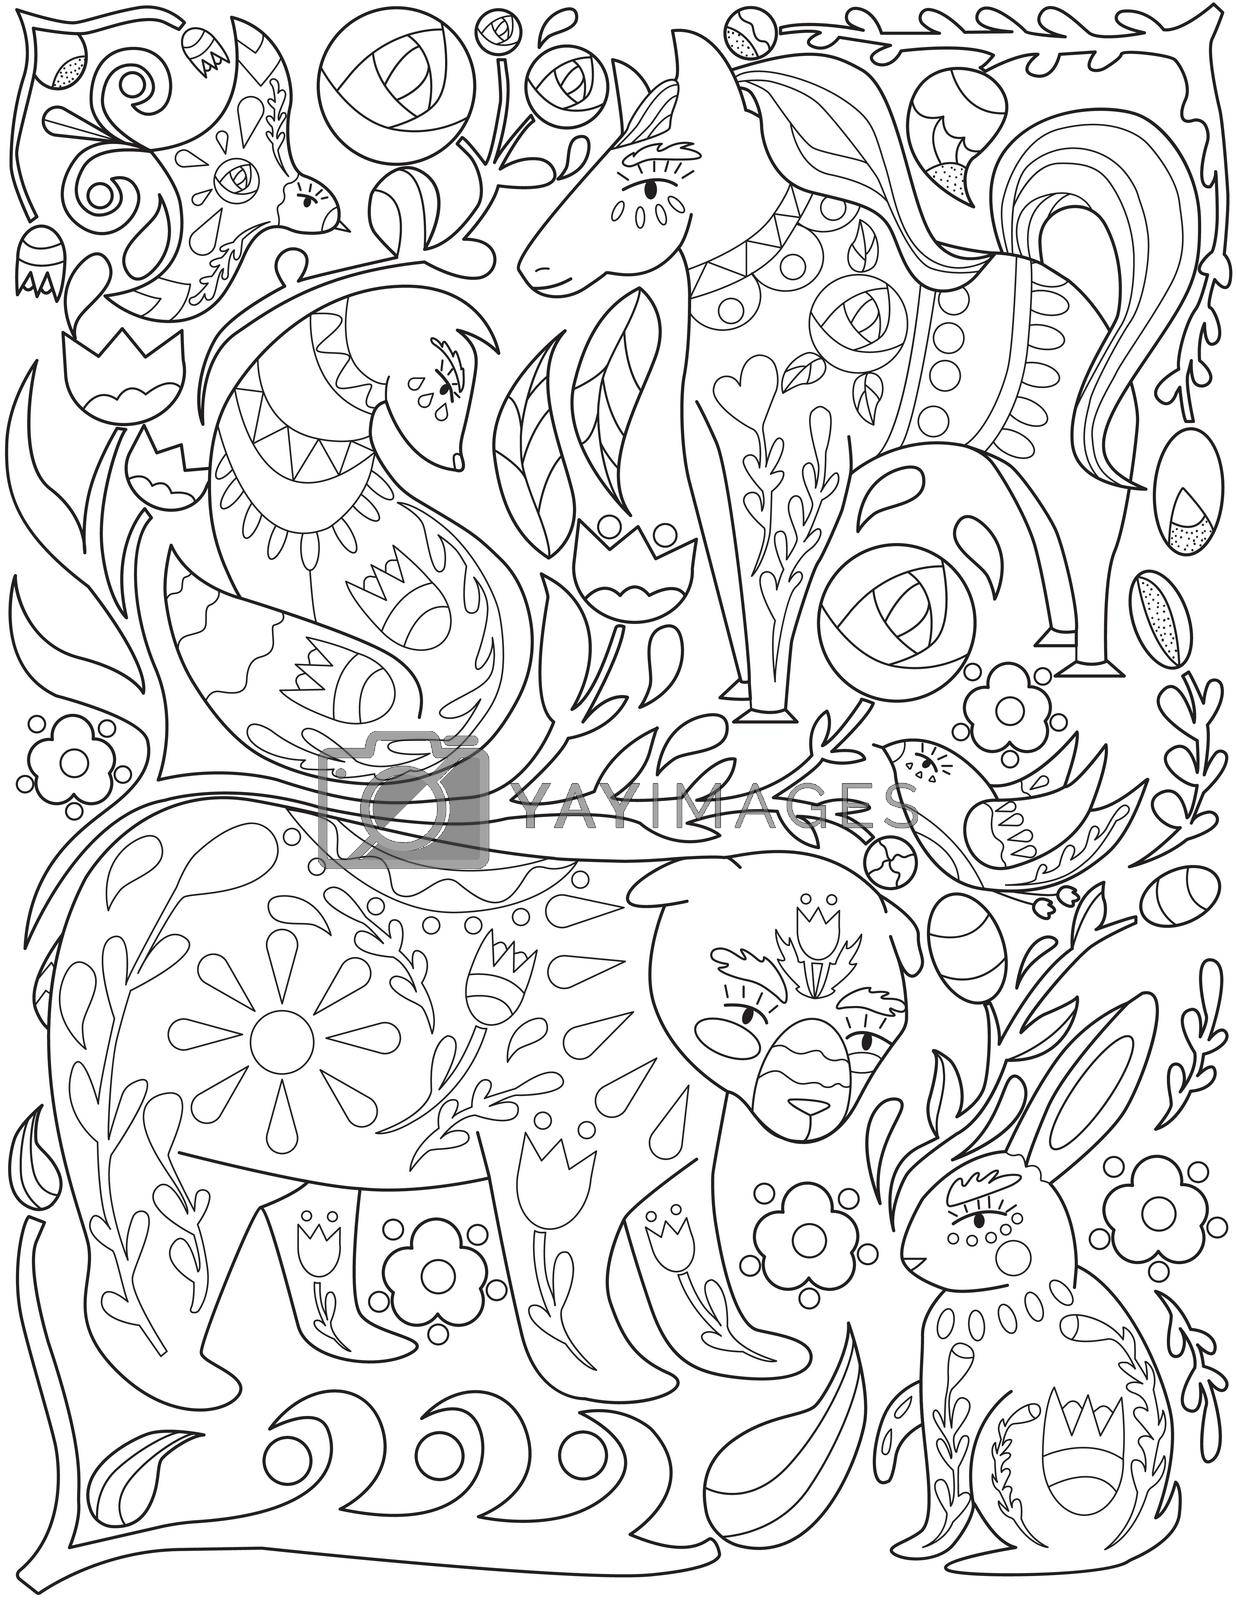 Royalty free image of Different Animals Fox Bird Hare Dog Fox Horse Colorless Line Drawing. Multiple Wildlife Creatures Rabbit Birds Canine Bear Coloring Book Page. by nialowwa